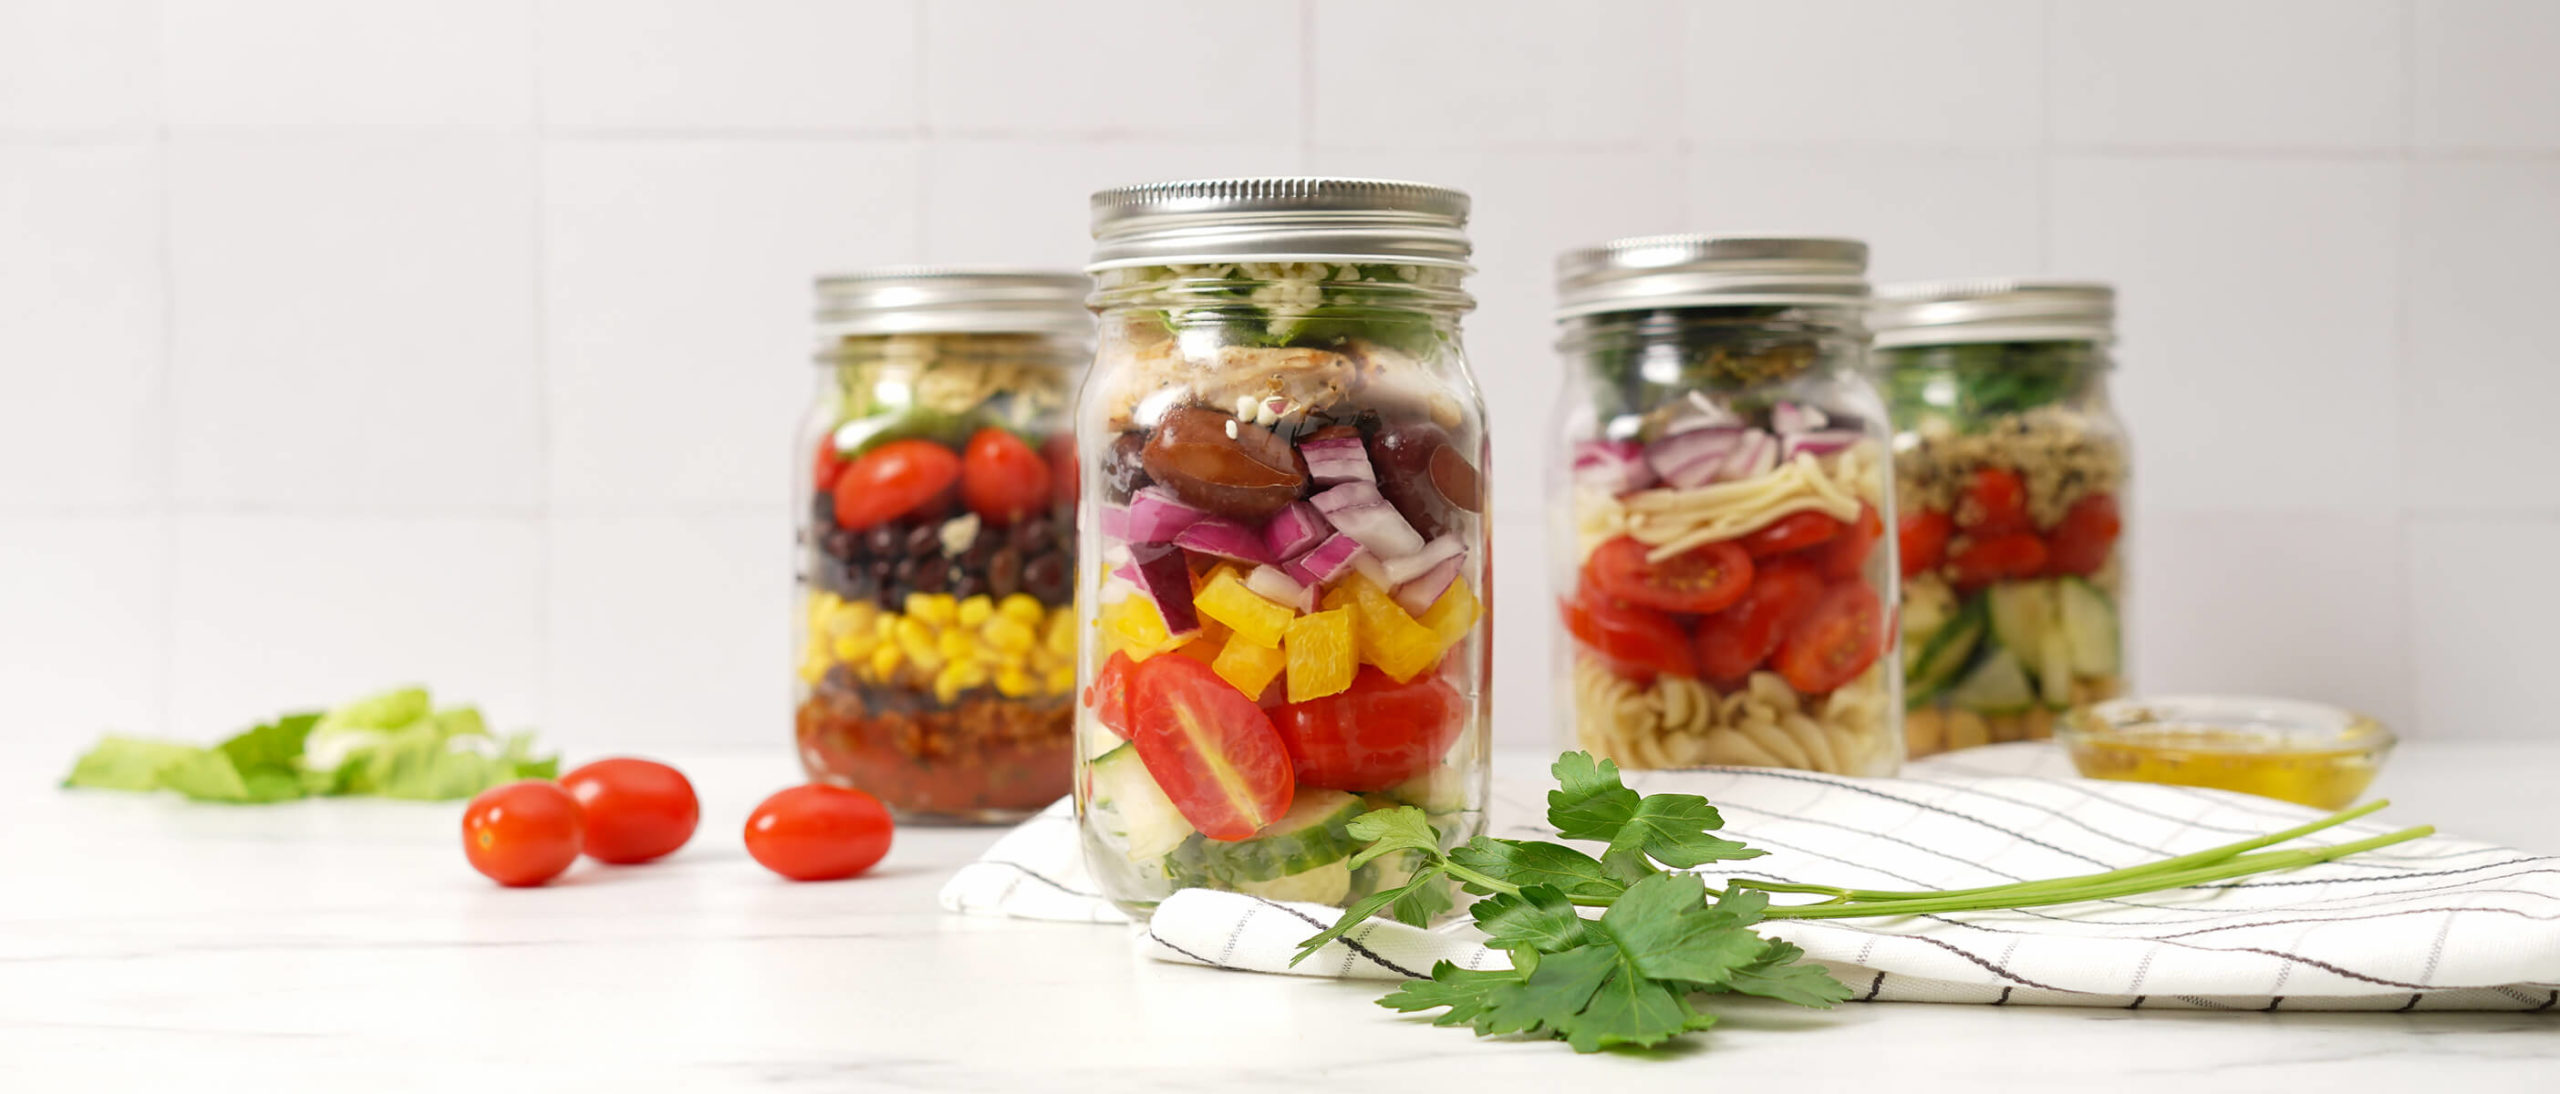 How To Make the Perfect Salad in a Jar + 4 Easy Recipe Ideas